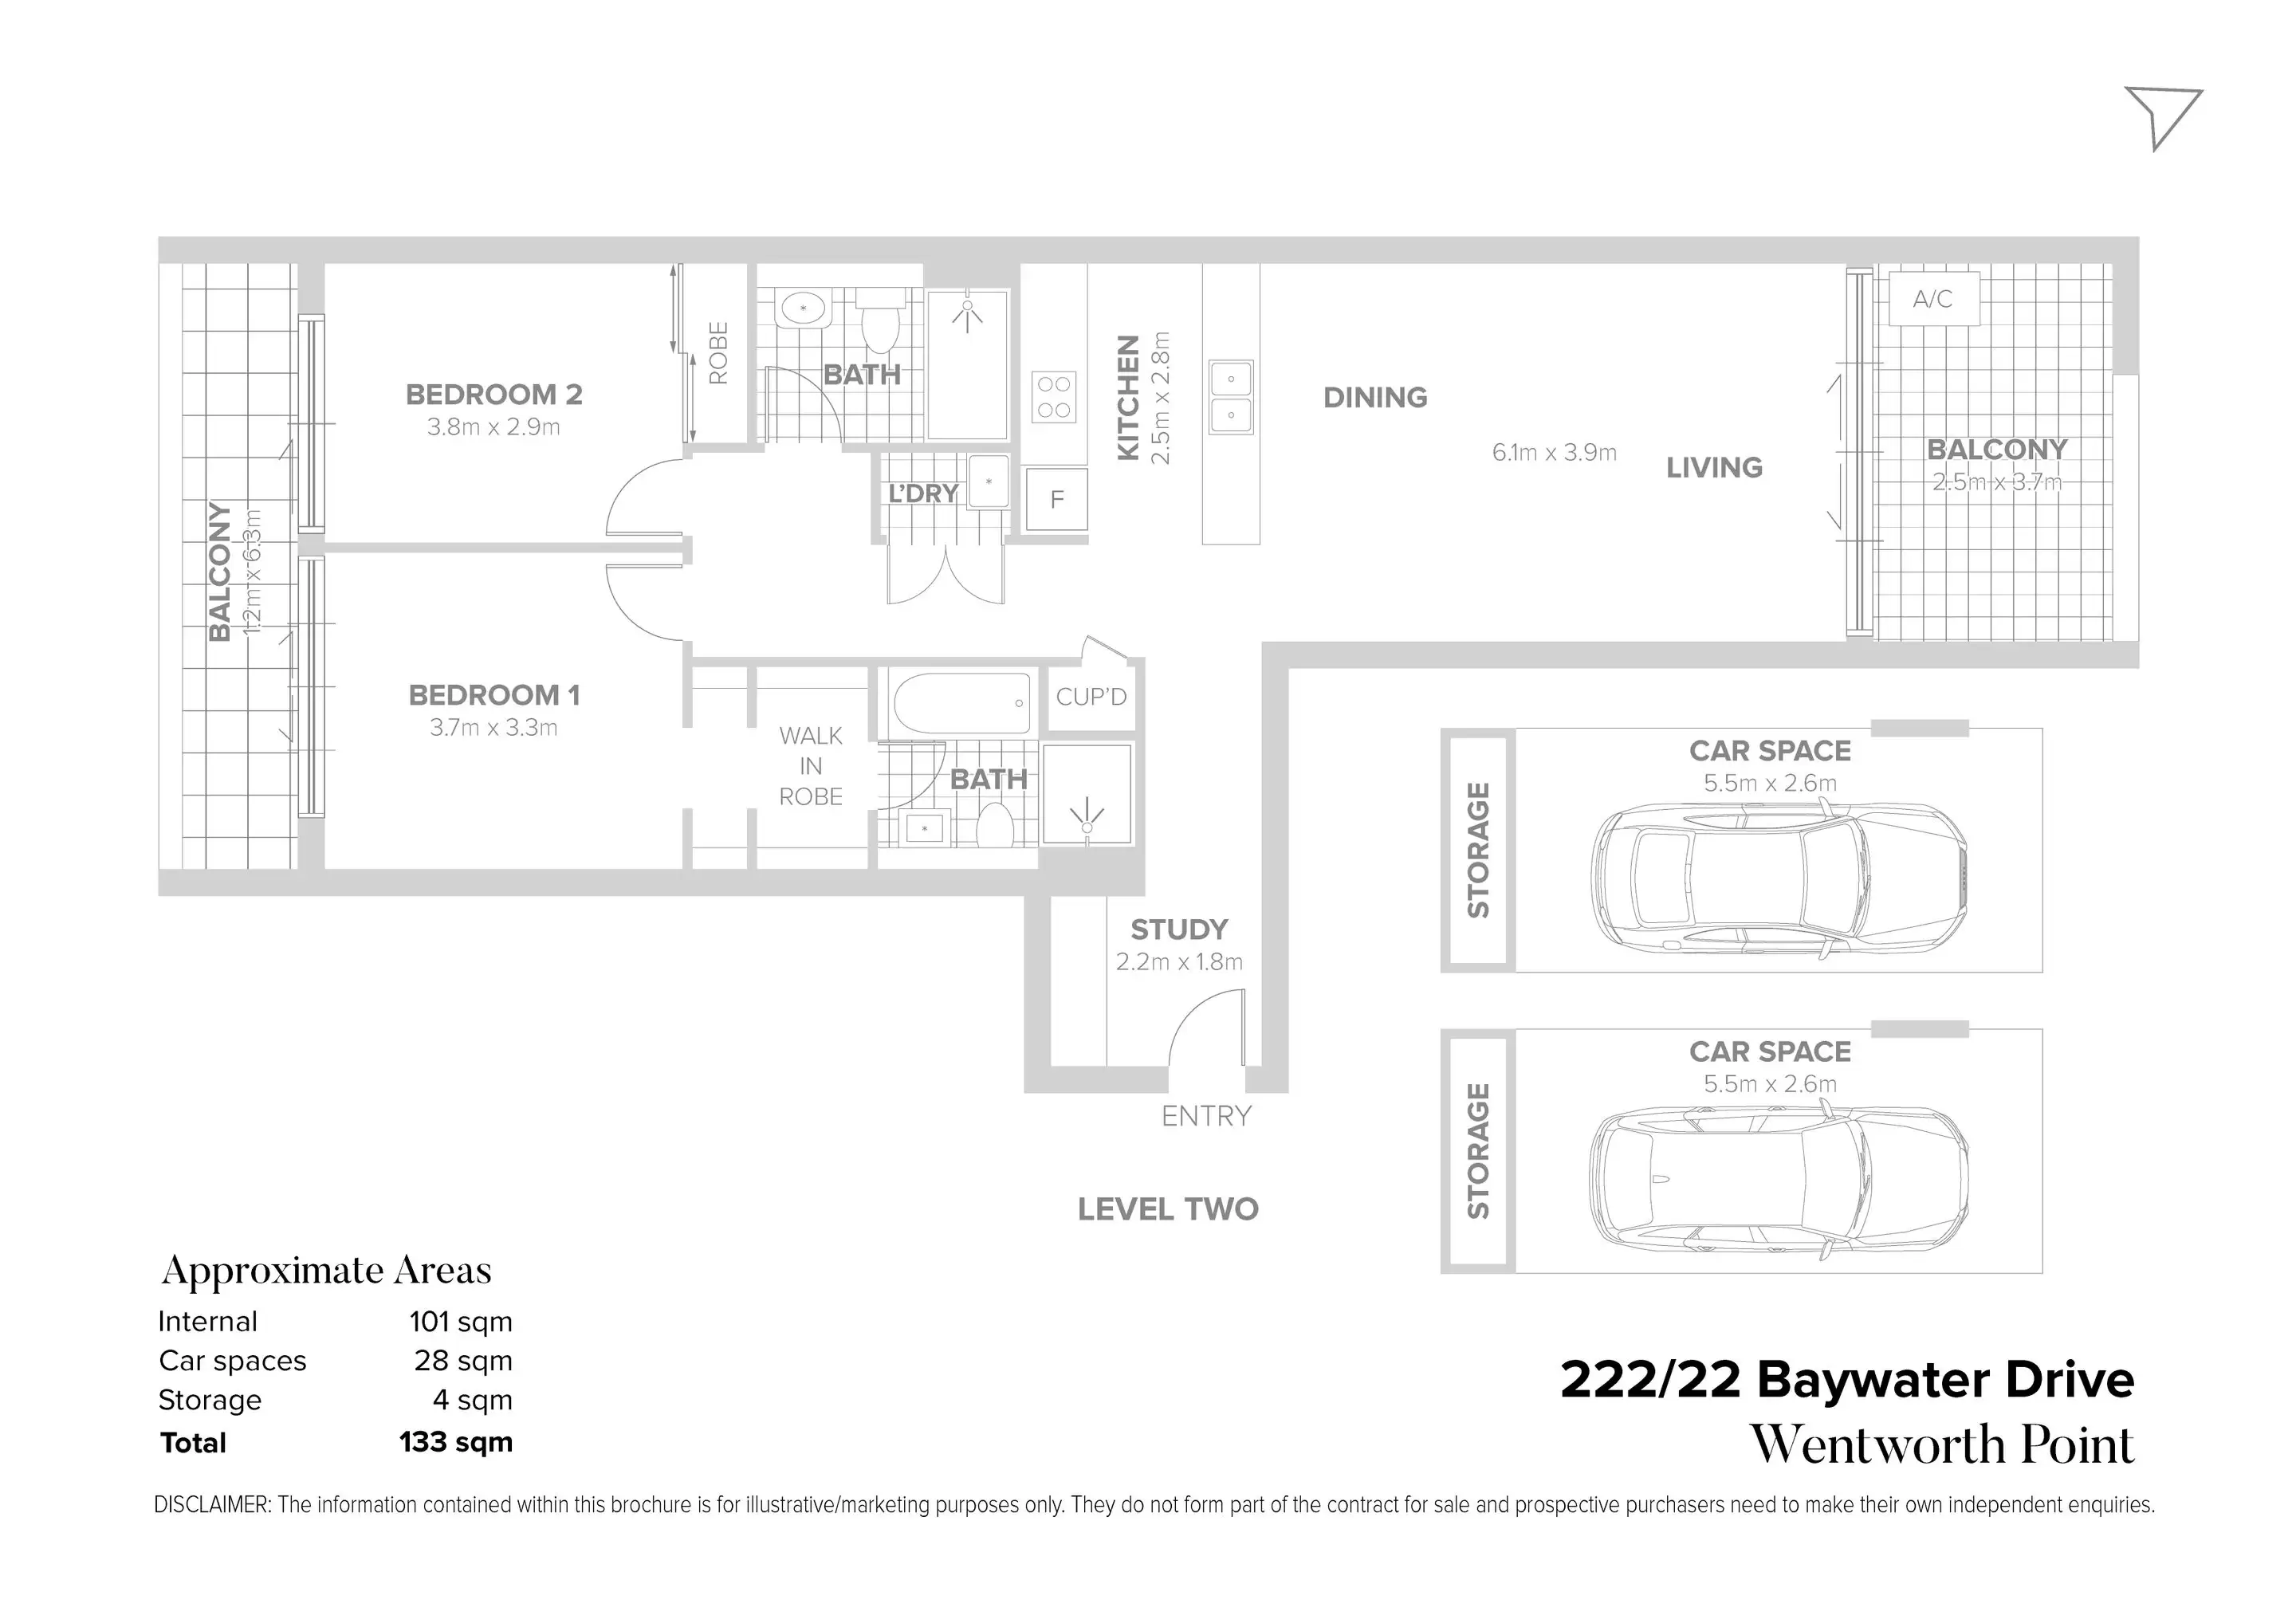 222/22 Baywater Drive, Wentworth Point Sold by Chidiac Realty - floorplan